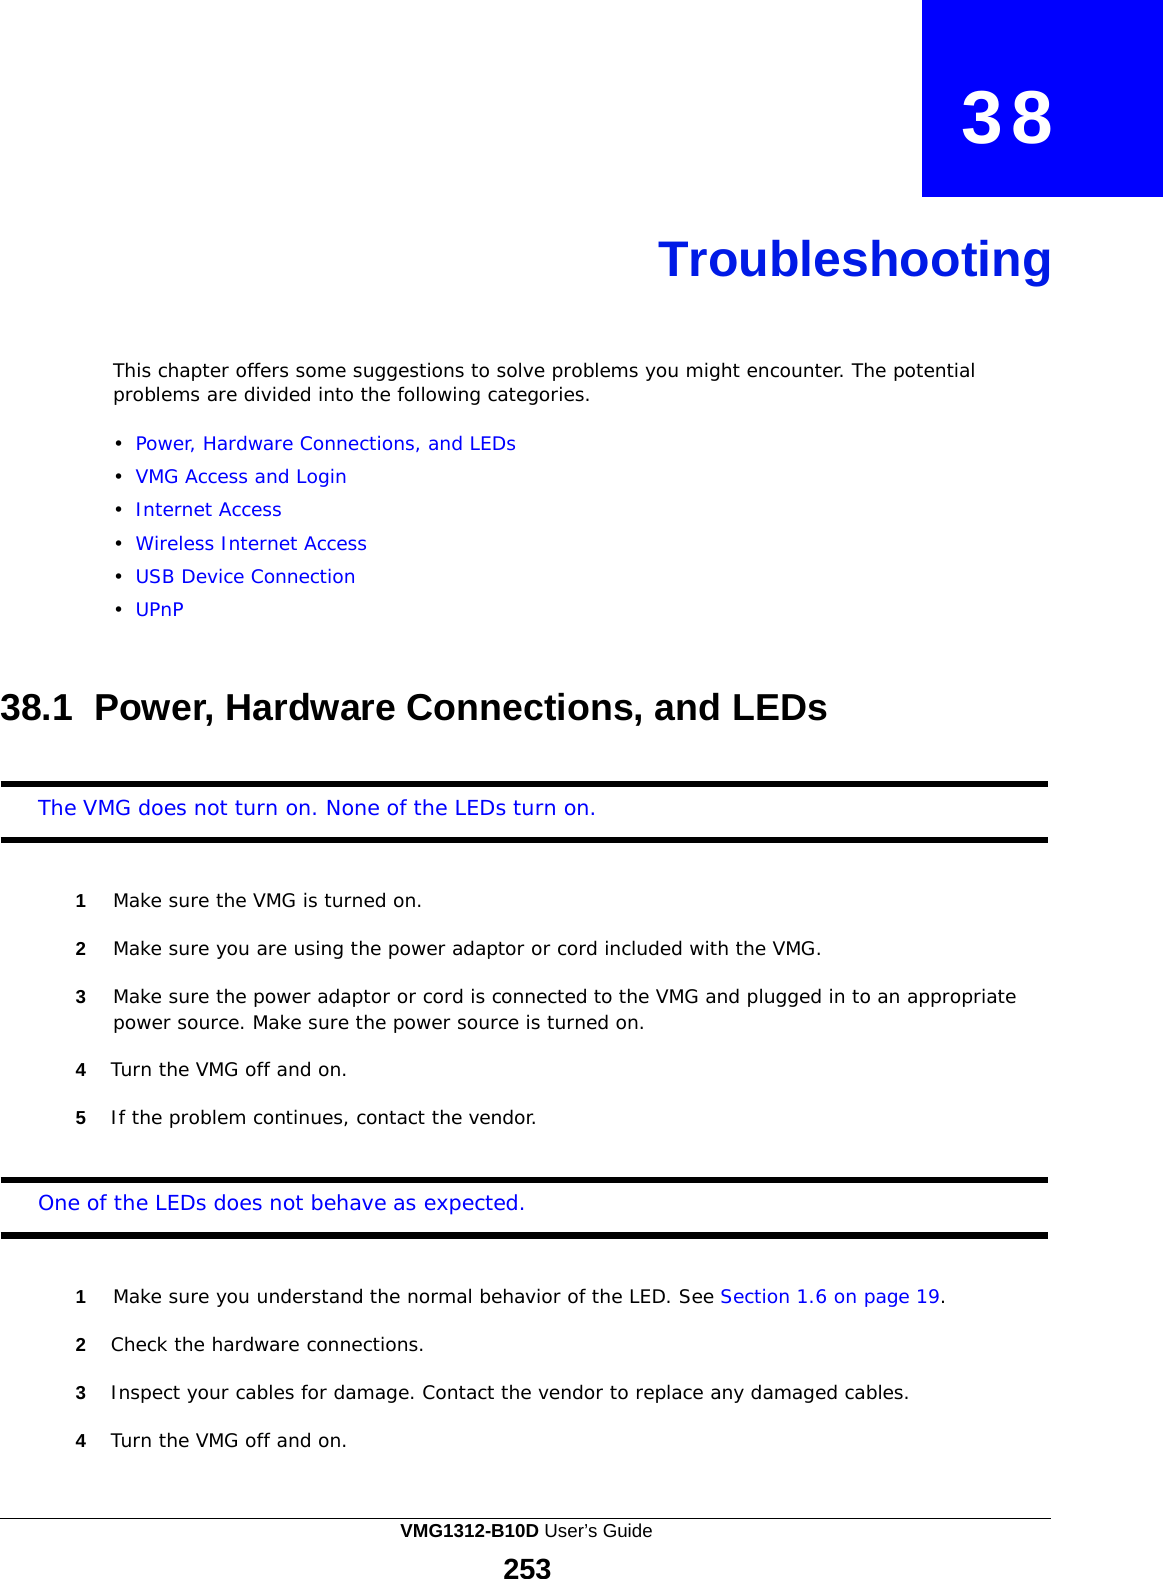  38     Troubleshooting    This chapter offers some suggestions to solve problems you might encounter. The potential problems are divided into the following categories.  •  Power, Hardware Connections, and LEDs  •  VMG Access and Login  •  Internet Access  •  Wireless Internet Access  •  USB Device Connection  •  UPnP    38.1 Power, Hardware Connections, and LEDs    The VMG does not turn on. None of the LEDs turn on.    1  Make sure the VMG is turned on.  2  Make sure you are using the power adaptor or cord included with the VMG.  3  Make sure the power adaptor or cord is connected to the VMG and plugged in to an appropriate power source. Make sure the power source is turned on.  4  Turn the VMG off and on.  5  If the problem continues, contact the vendor.    One of the LEDs does not behave as expected.    1  Make sure you understand the normal behavior of the LED. See Section 1.6 on page 19.  2  Check the hardware connections.  3  Inspect your cables for damage. Contact the vendor to replace any damaged cables.  4  Turn the VMG off and on. VMG1312-B10D User’s Guide 253  